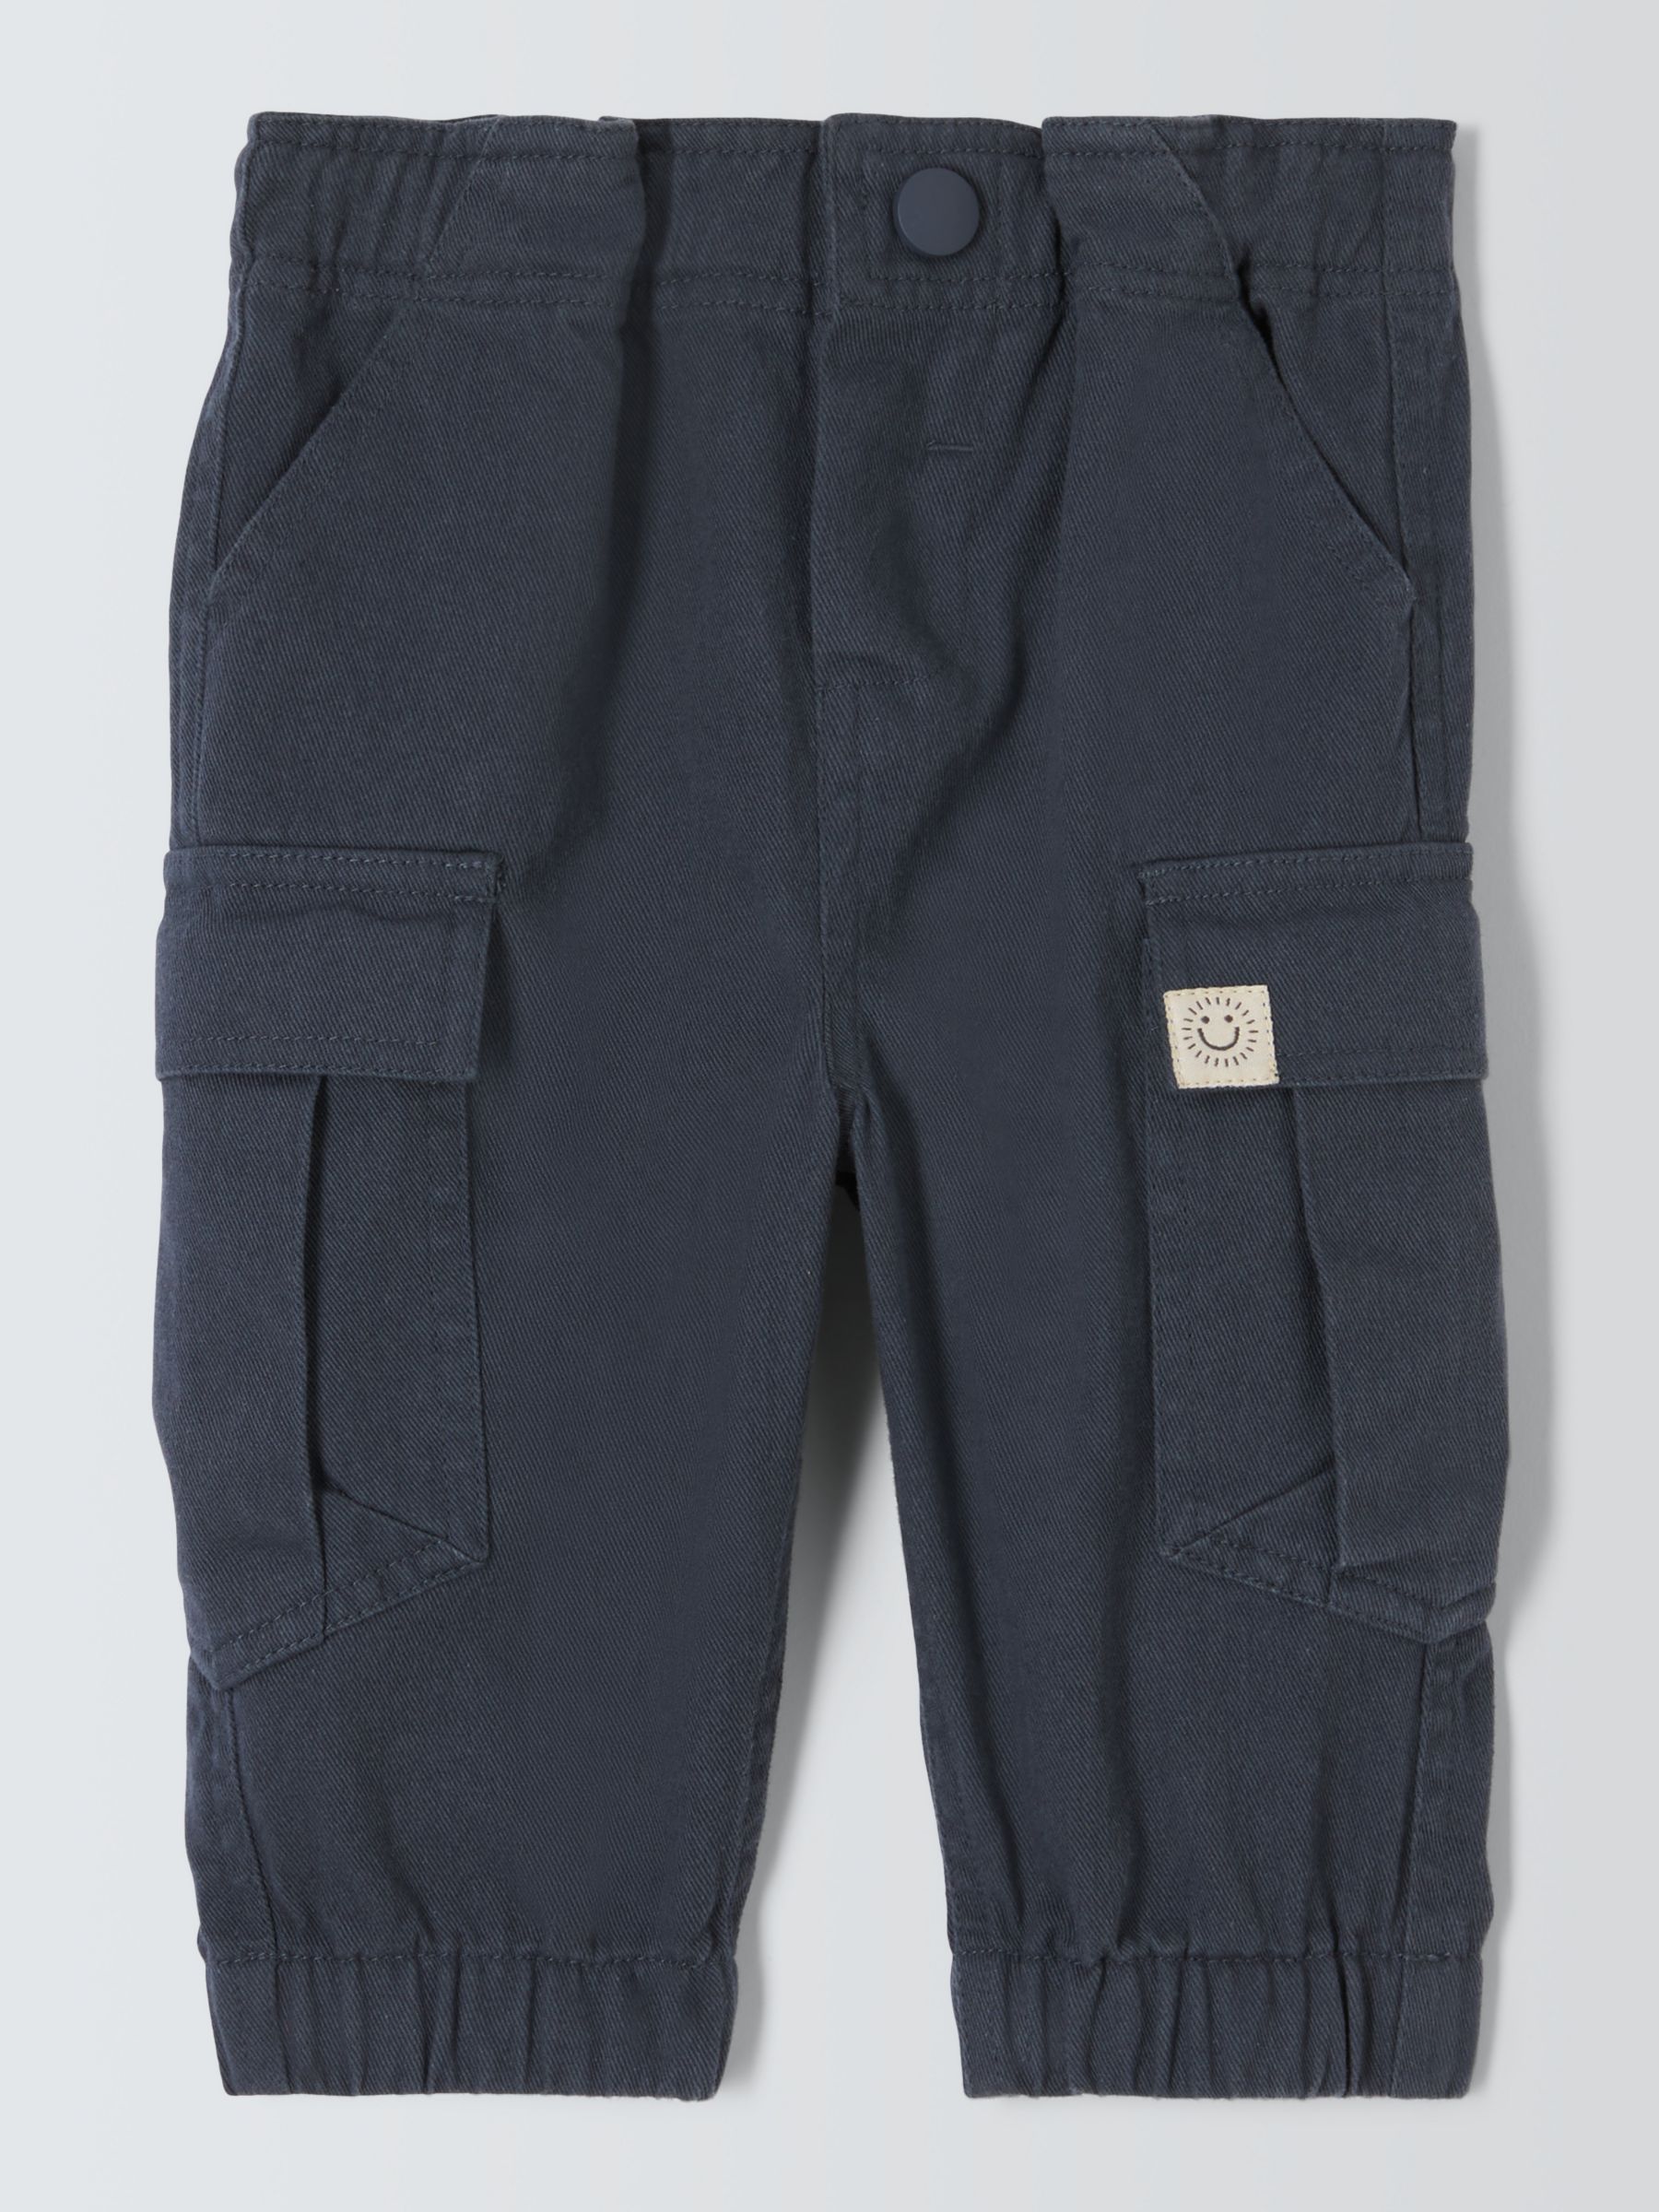 John Lewis Baby Twill Cargo Trousers, Grey, 0-3 months